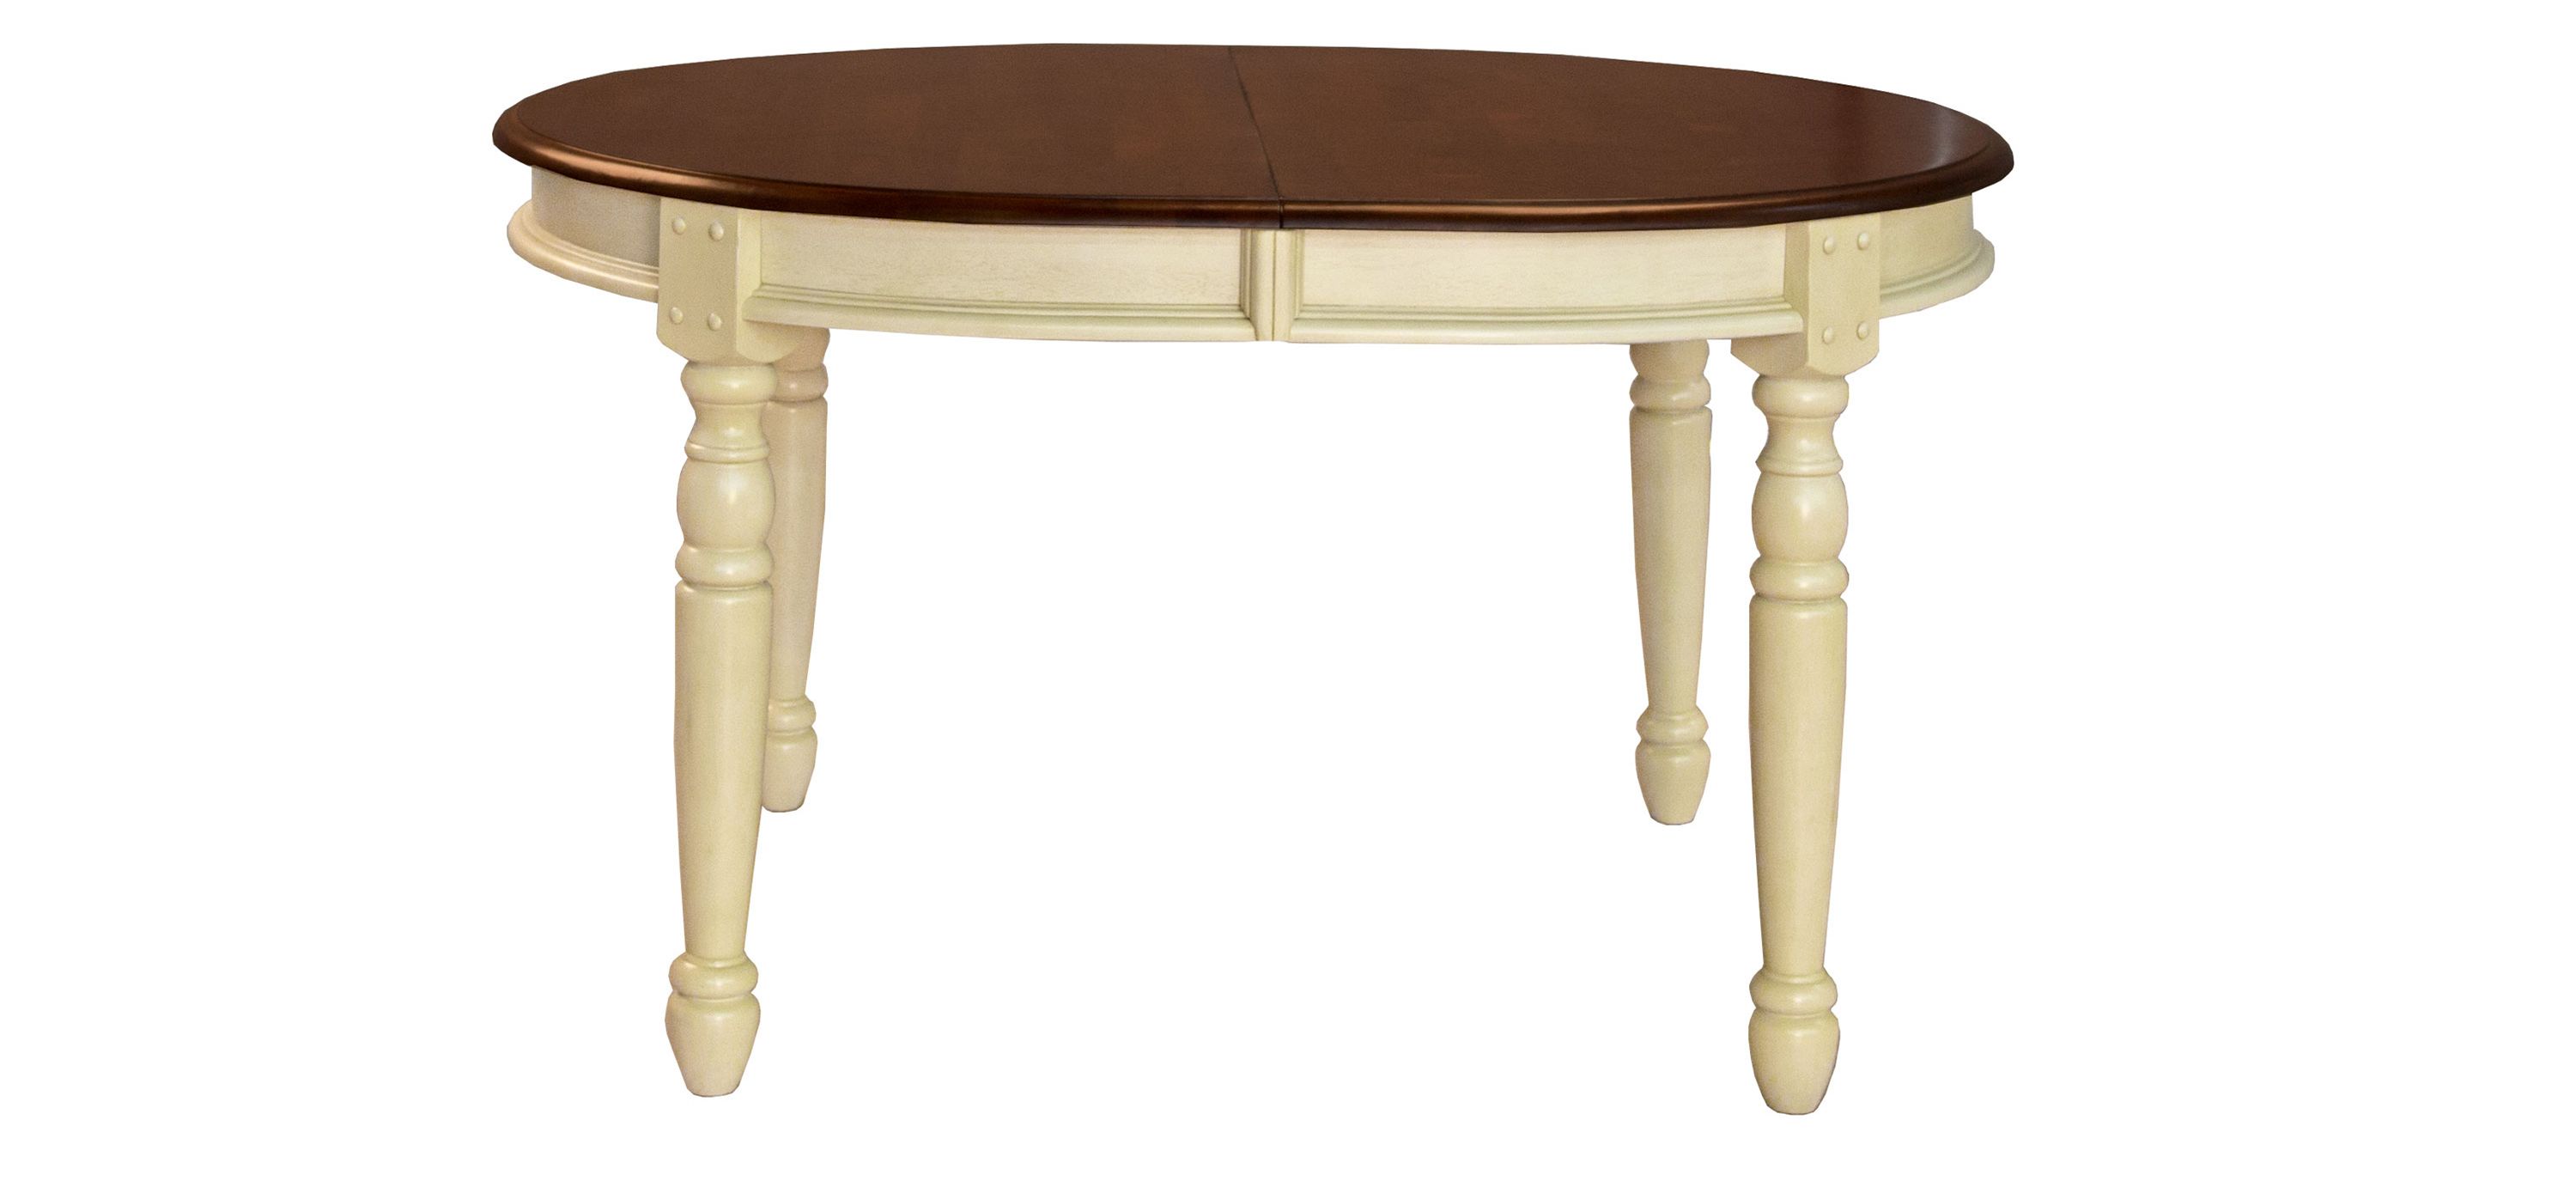 British Isles Oval Double-Leaf Dining Table